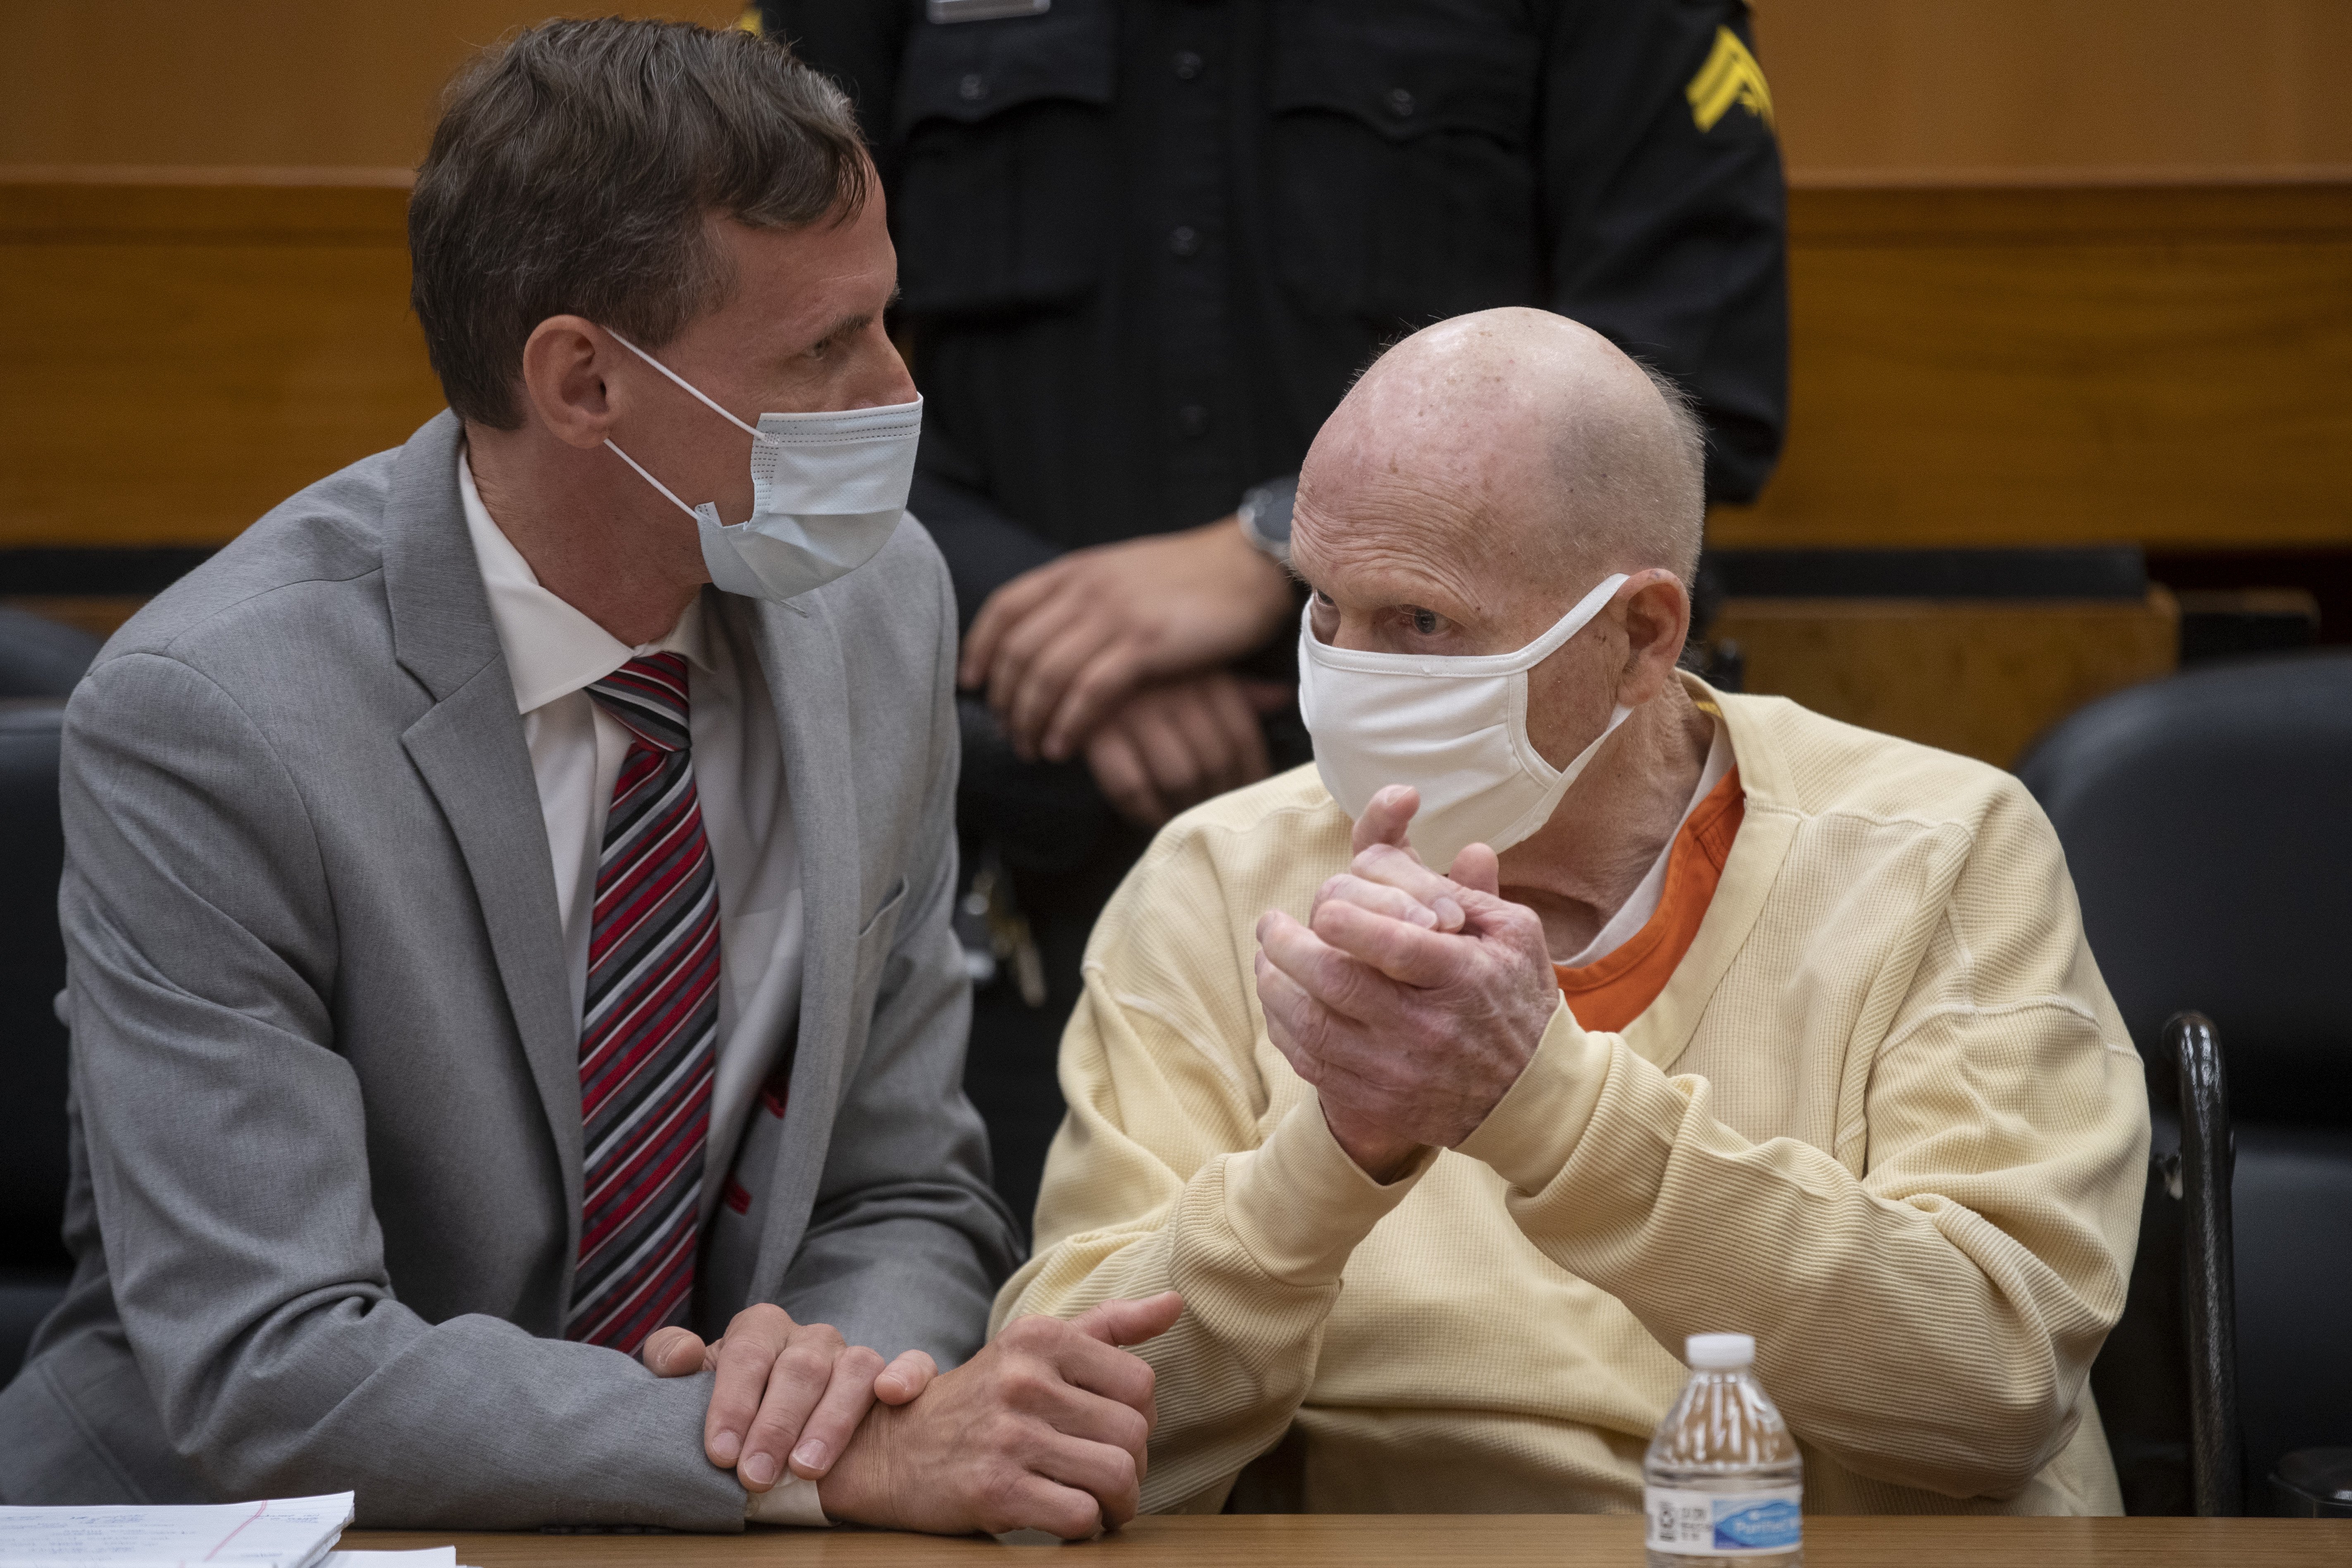 Joseph James DeAngelo (right) is photographed as he speaks with public defender Joseph Cress at the end of the second day of victim impact statements at the Gordon D. Schaber Sacramento County Courthouse on Wednesday, August 19, 2020, in Sacramento, California. | Source: Getty Images